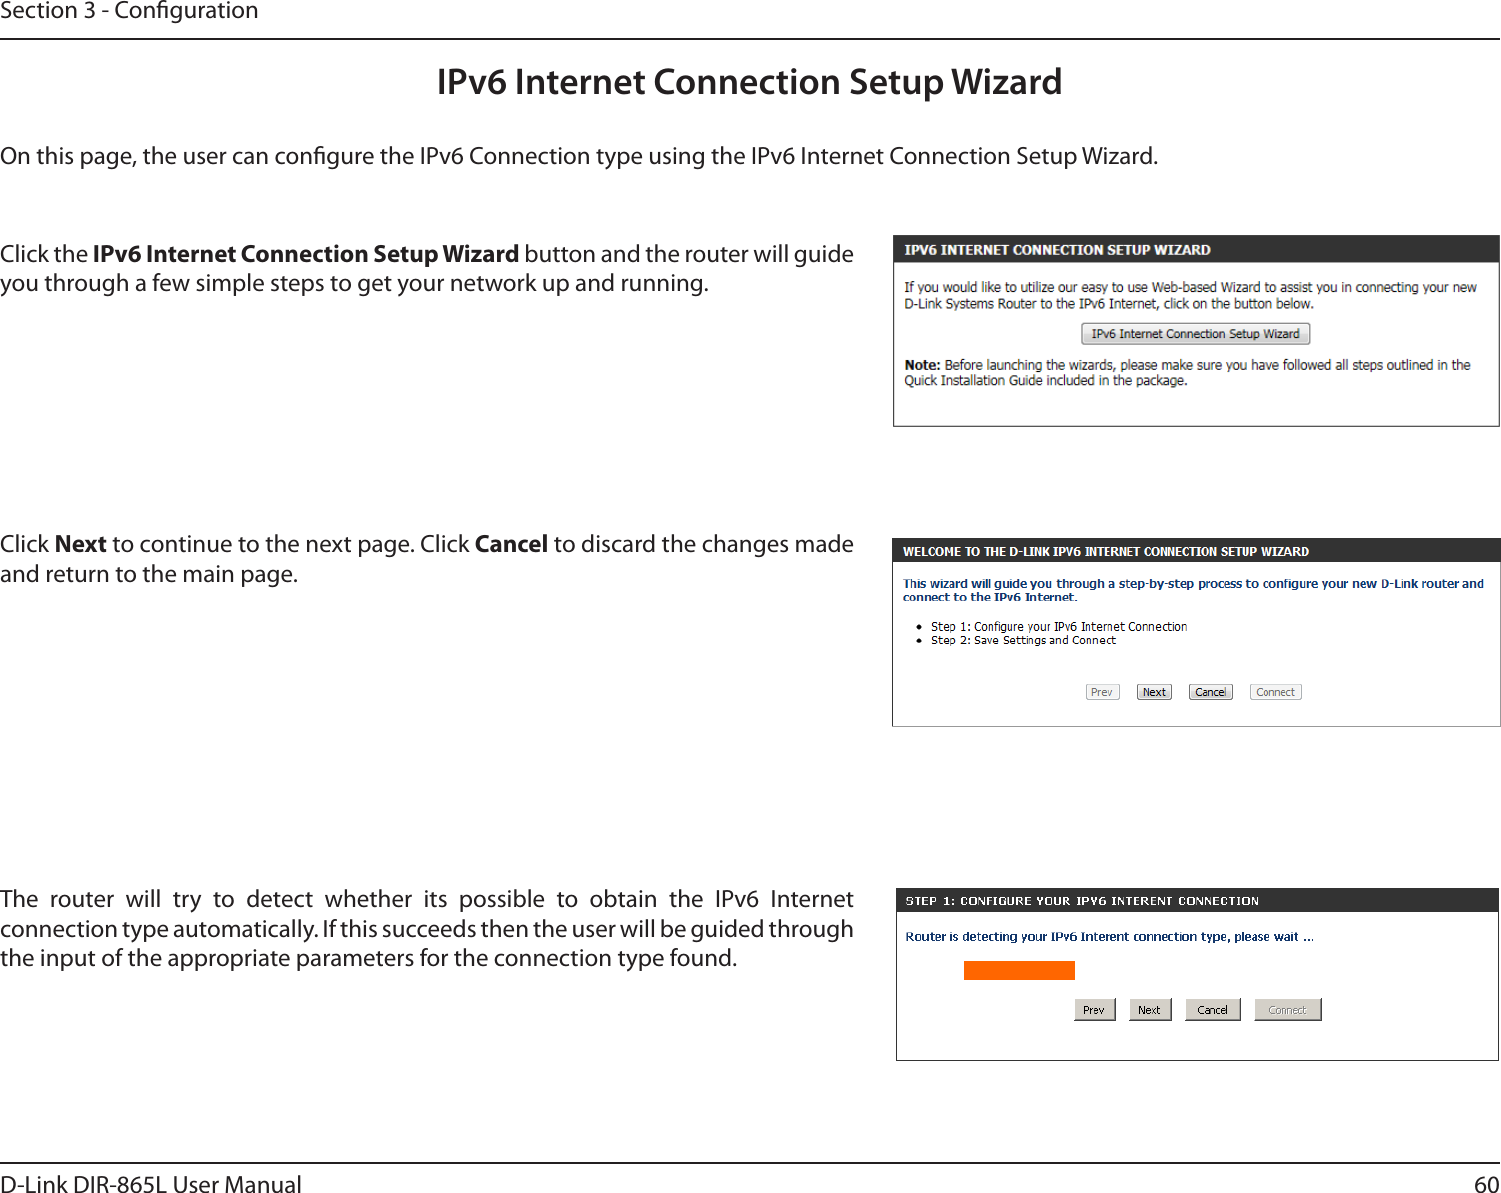 60D-Link DIR-865L User ManualSection 3 - CongurationIPv6 Internet Connection Setup WizardOn this page, the user can congure the IPv6 Connection type using the IPv6 Internet Connection Setup Wizard.Click the IPv6 Internet Connection Setup Wizard button and the router will guide you through a few simple steps to get your network up and running.Click Next to continue to the next page. Click Cancel to discard the changes made and return to the main page.The  router  will  try  to  detect  whether  its  possible  to  obtain  the  IPv6  Internet connection type automatically. If this succeeds then the user will be guided through the input of the appropriate parameters for the connection type found.